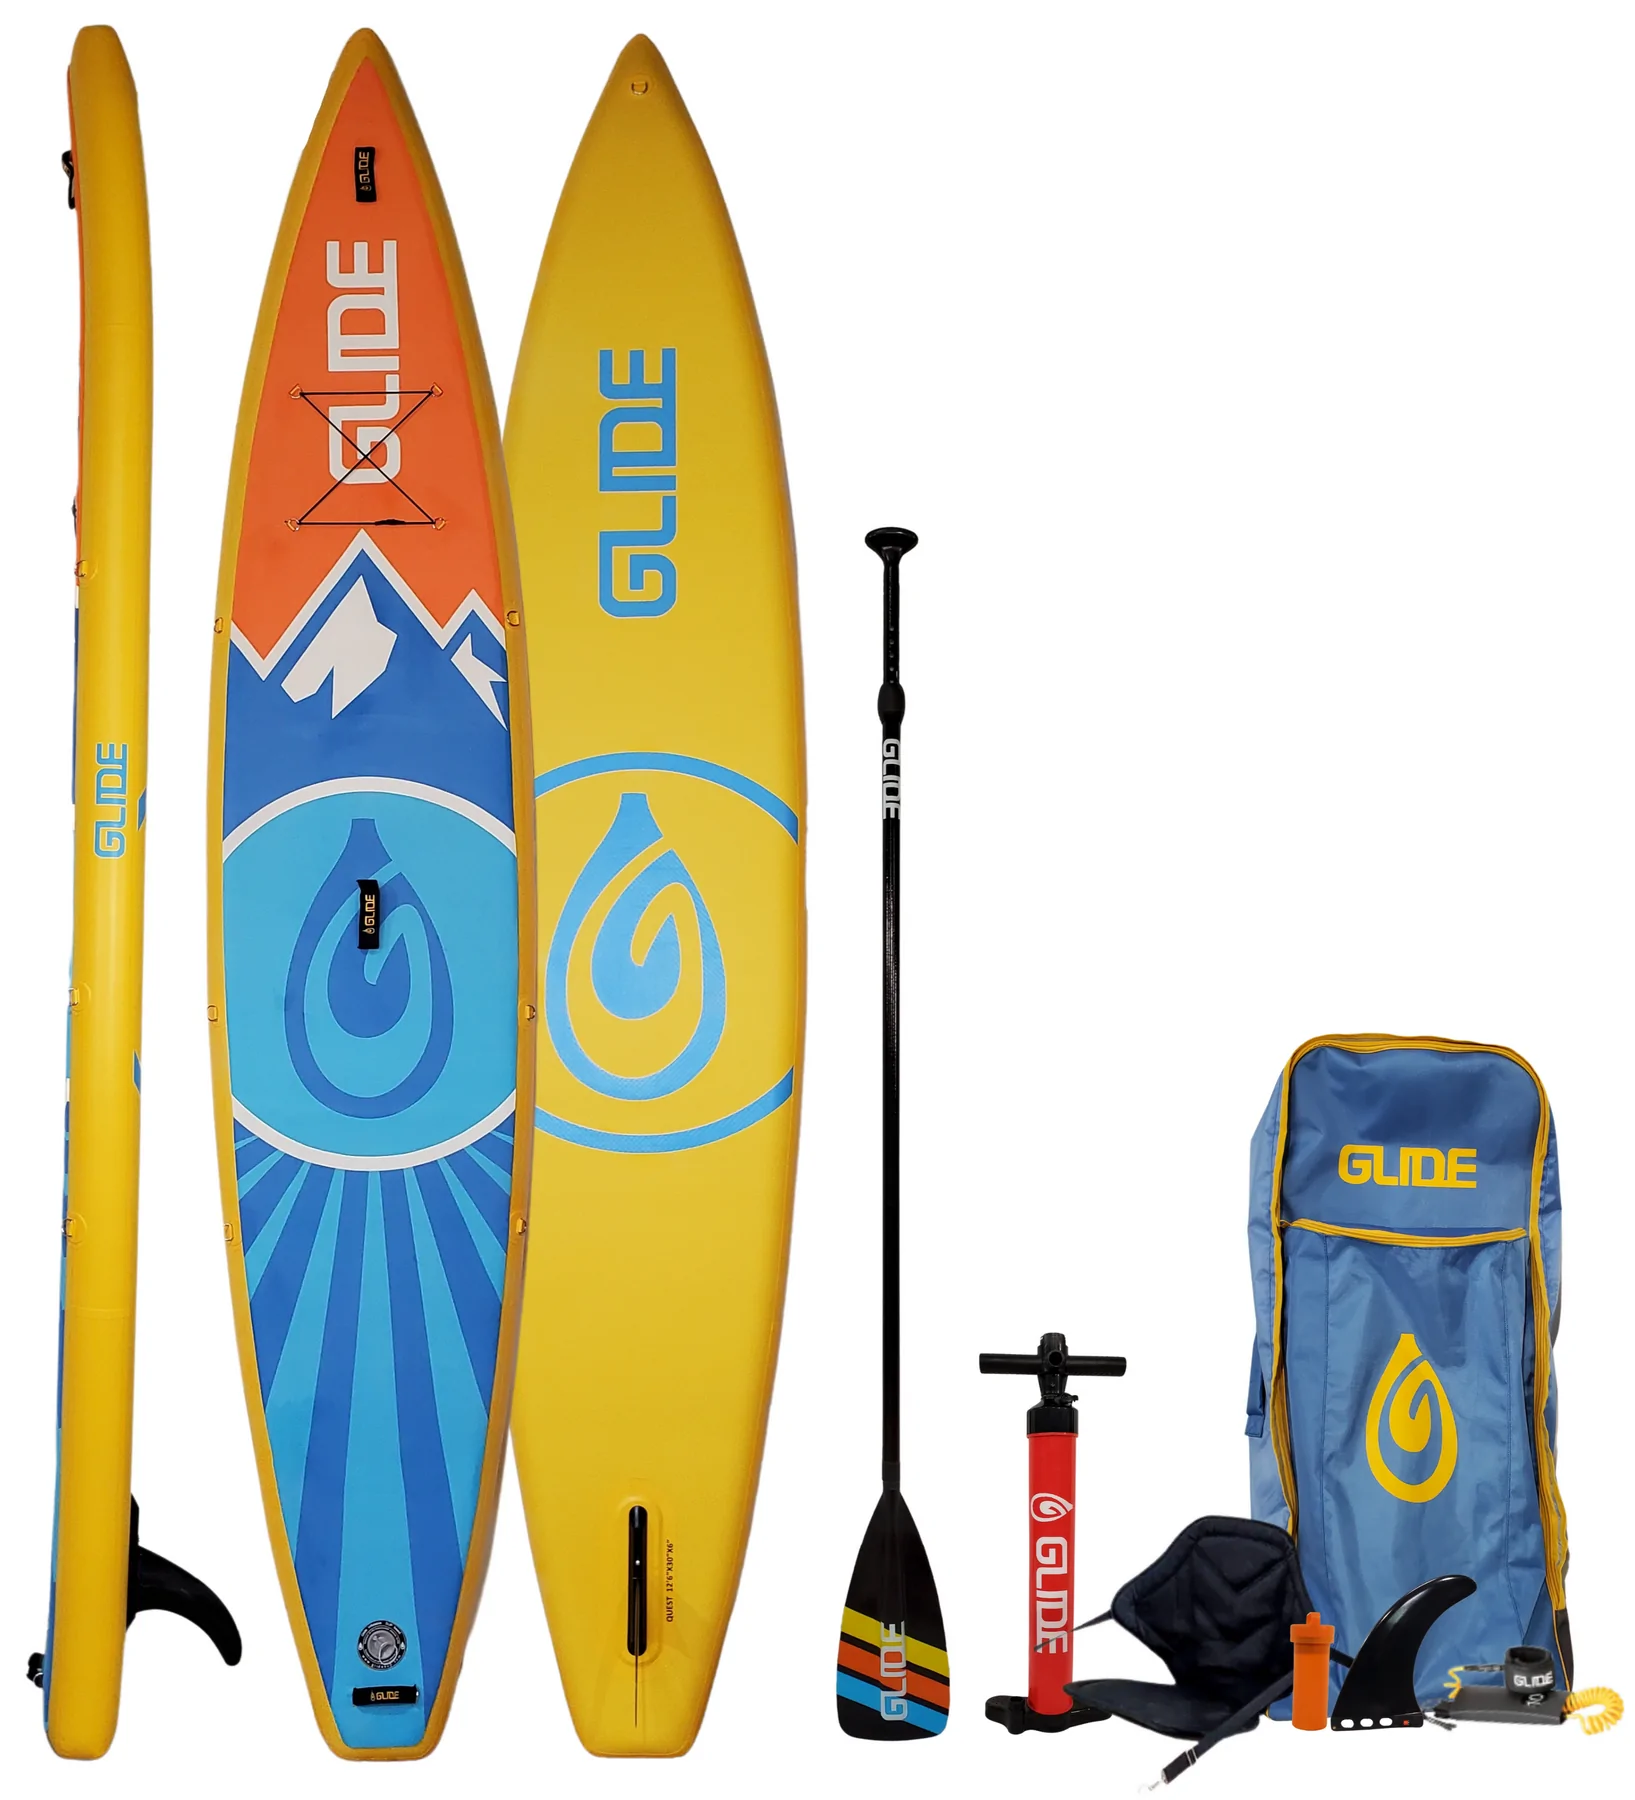 Stand up paddle board with backpack and chest strap for hiking and sup camping.